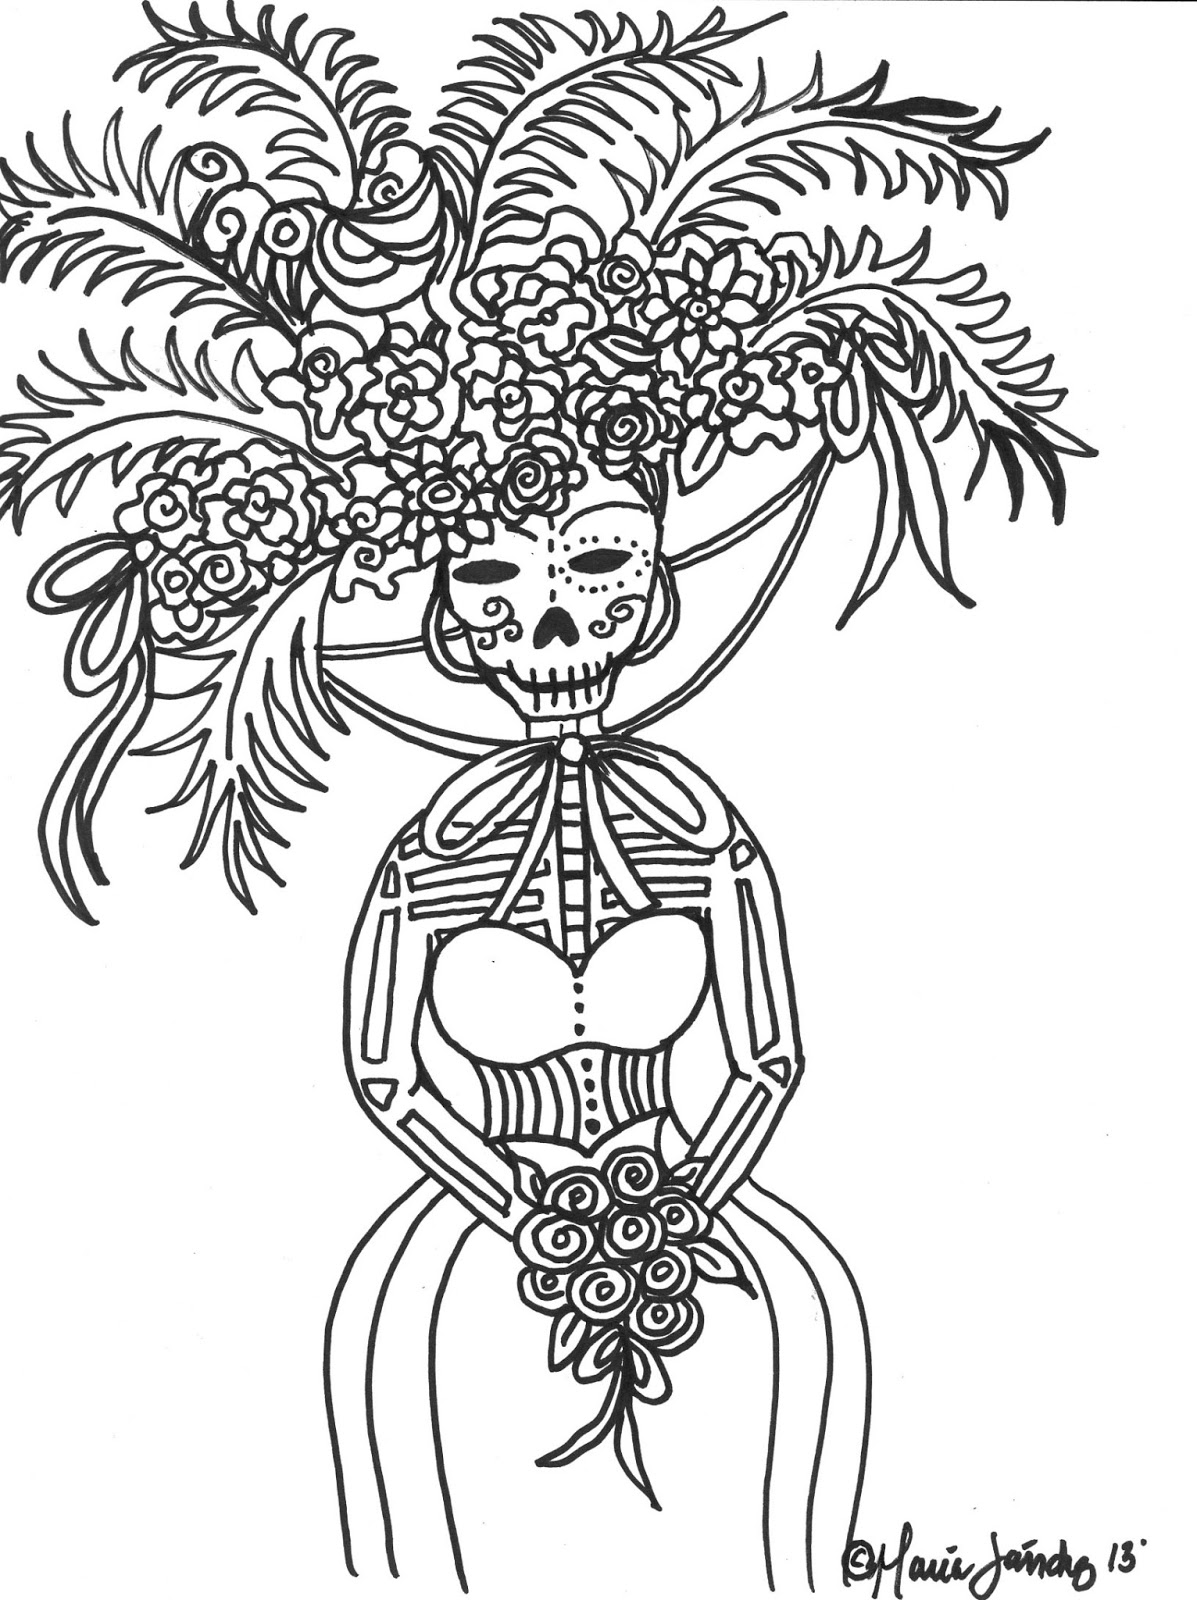 coloring-page-day-of-the-dead-60148-holidays-and-special-occasions